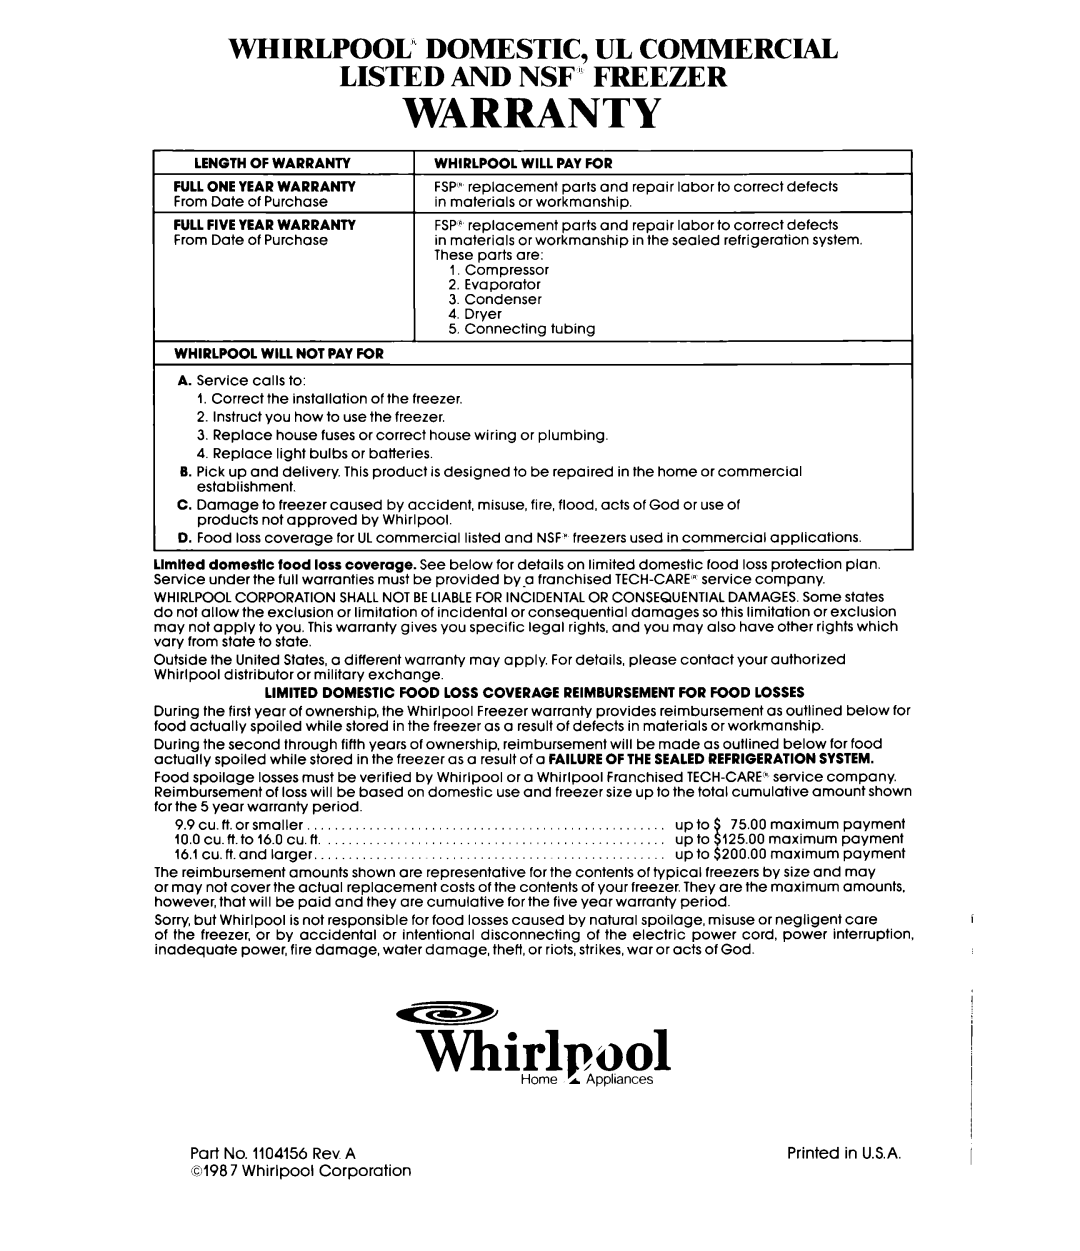 Whirlpool EV150C manual Warranty, Whirlp001, Whirlpool” Domestic, Ul Commercial, Listed And Nsf” Freezer 